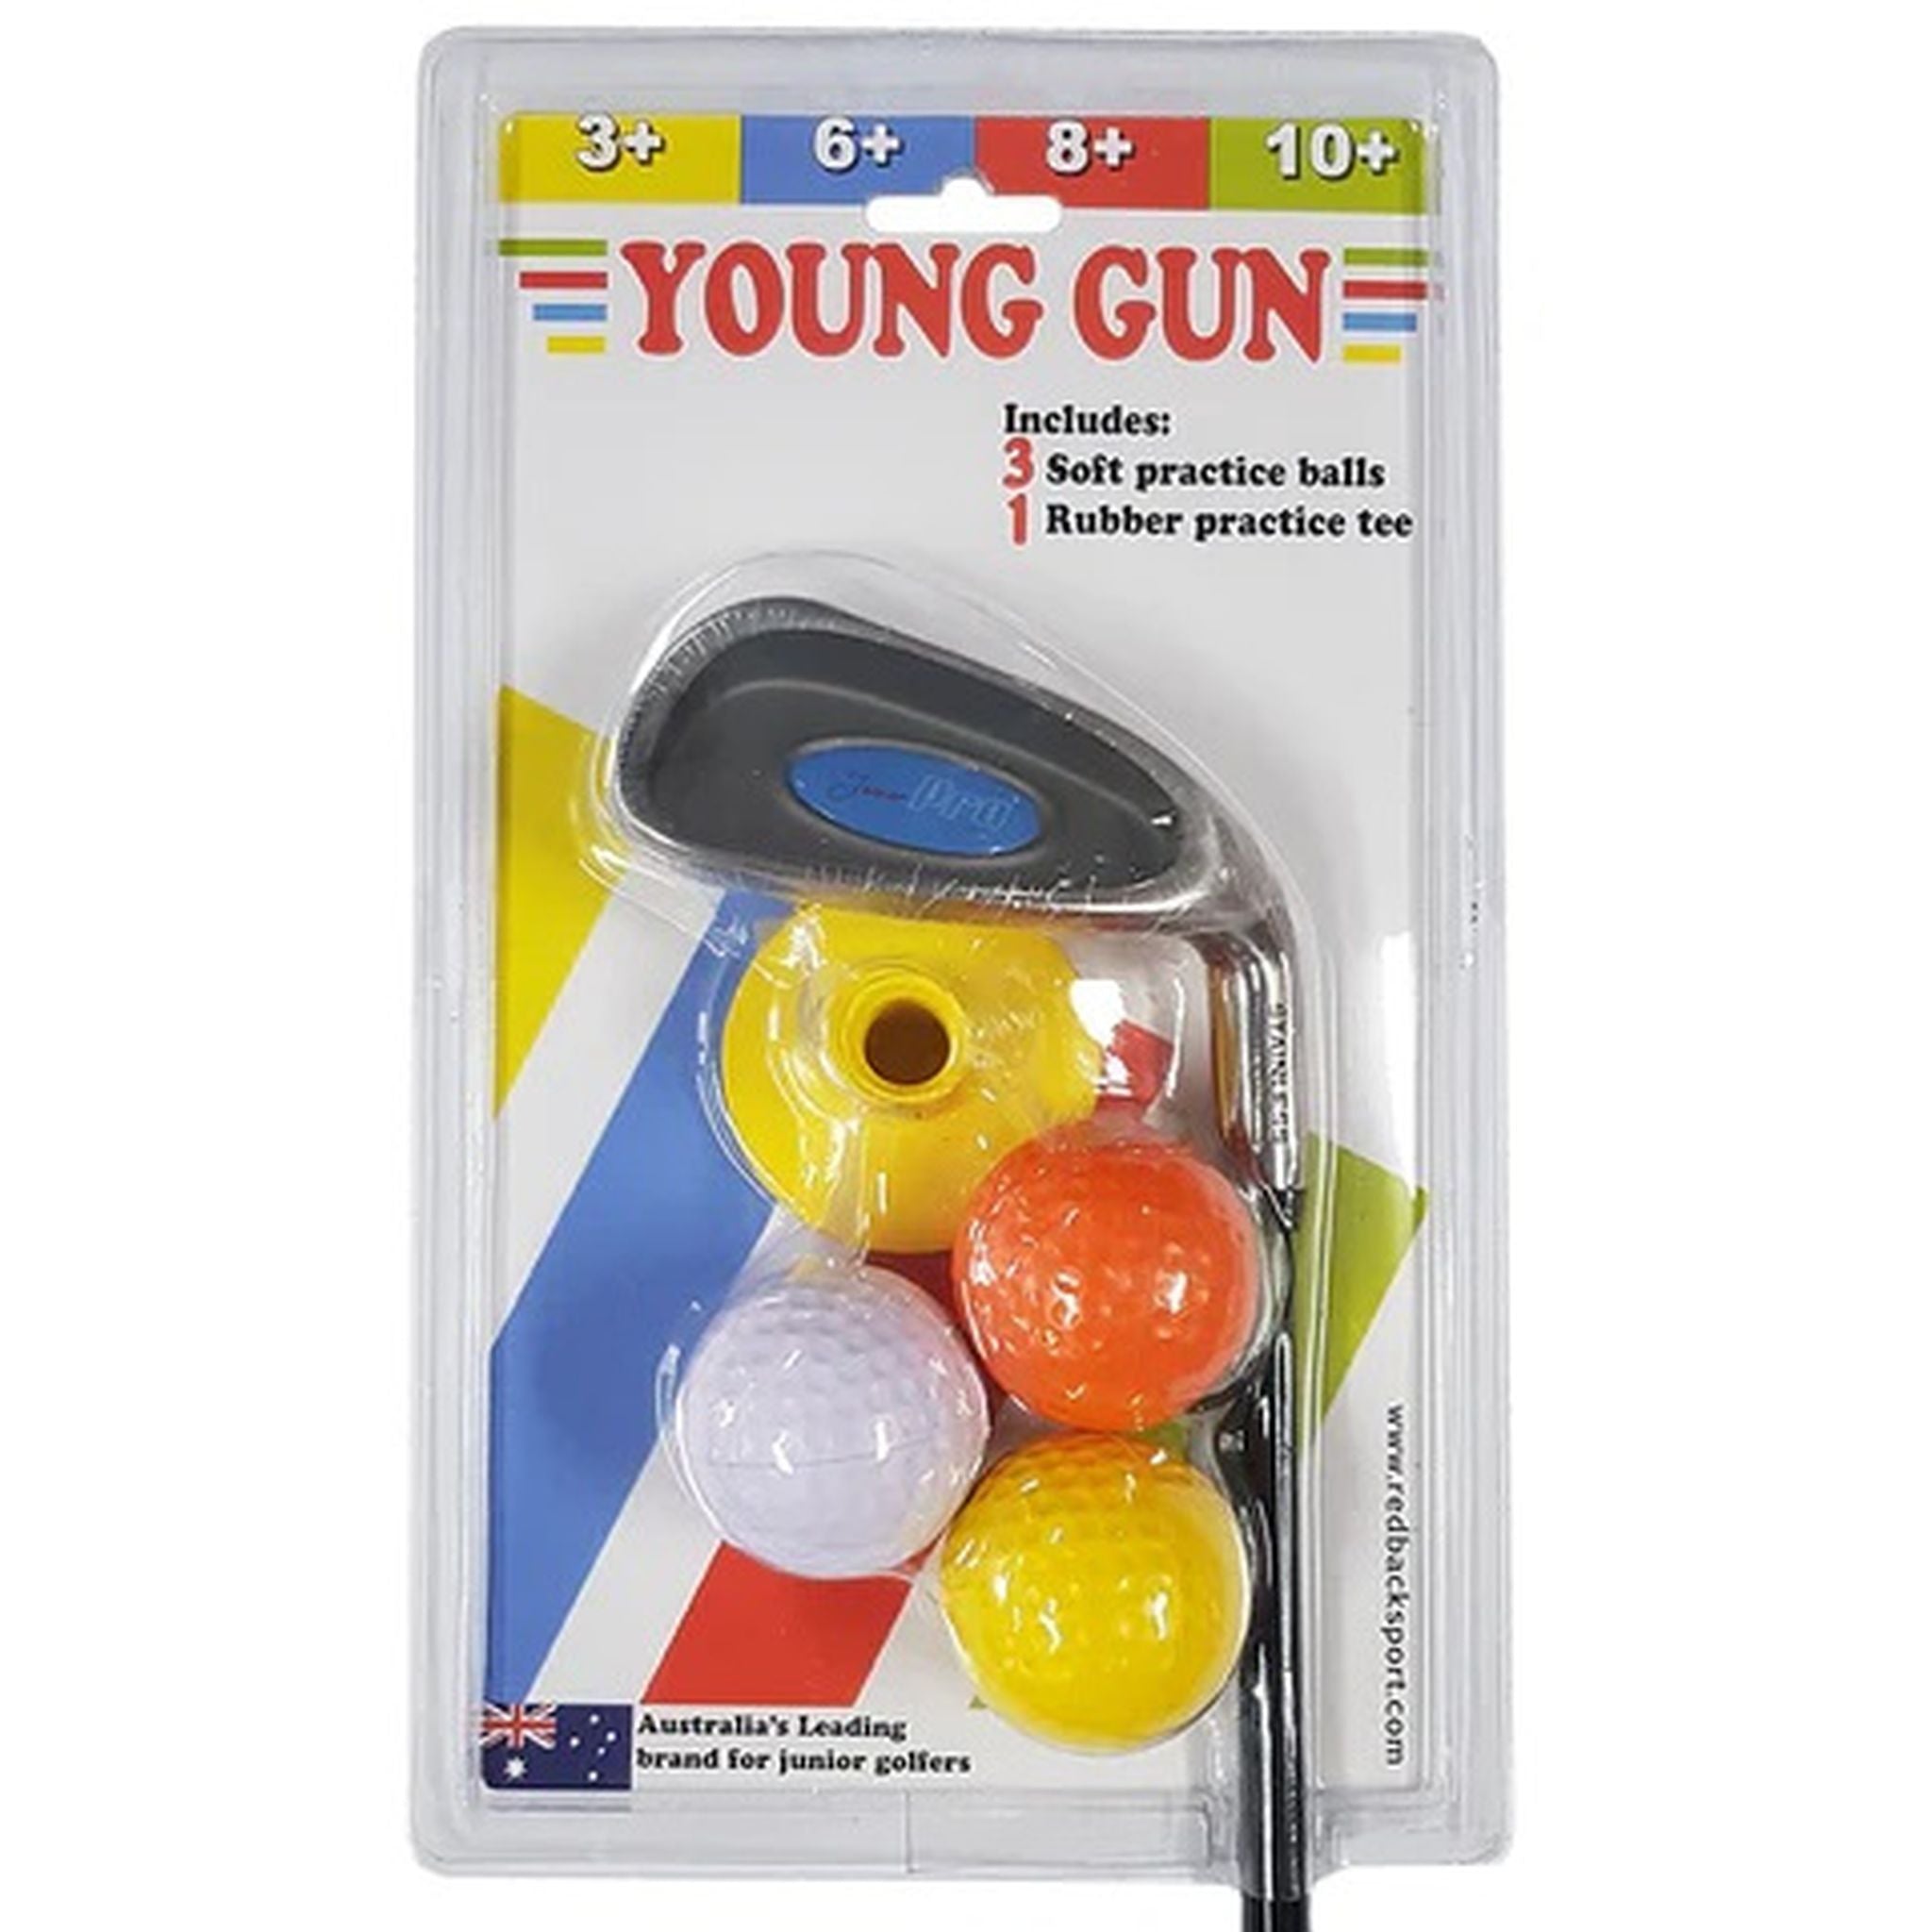 Redback Young Gun Learners Pack - 10+ Years